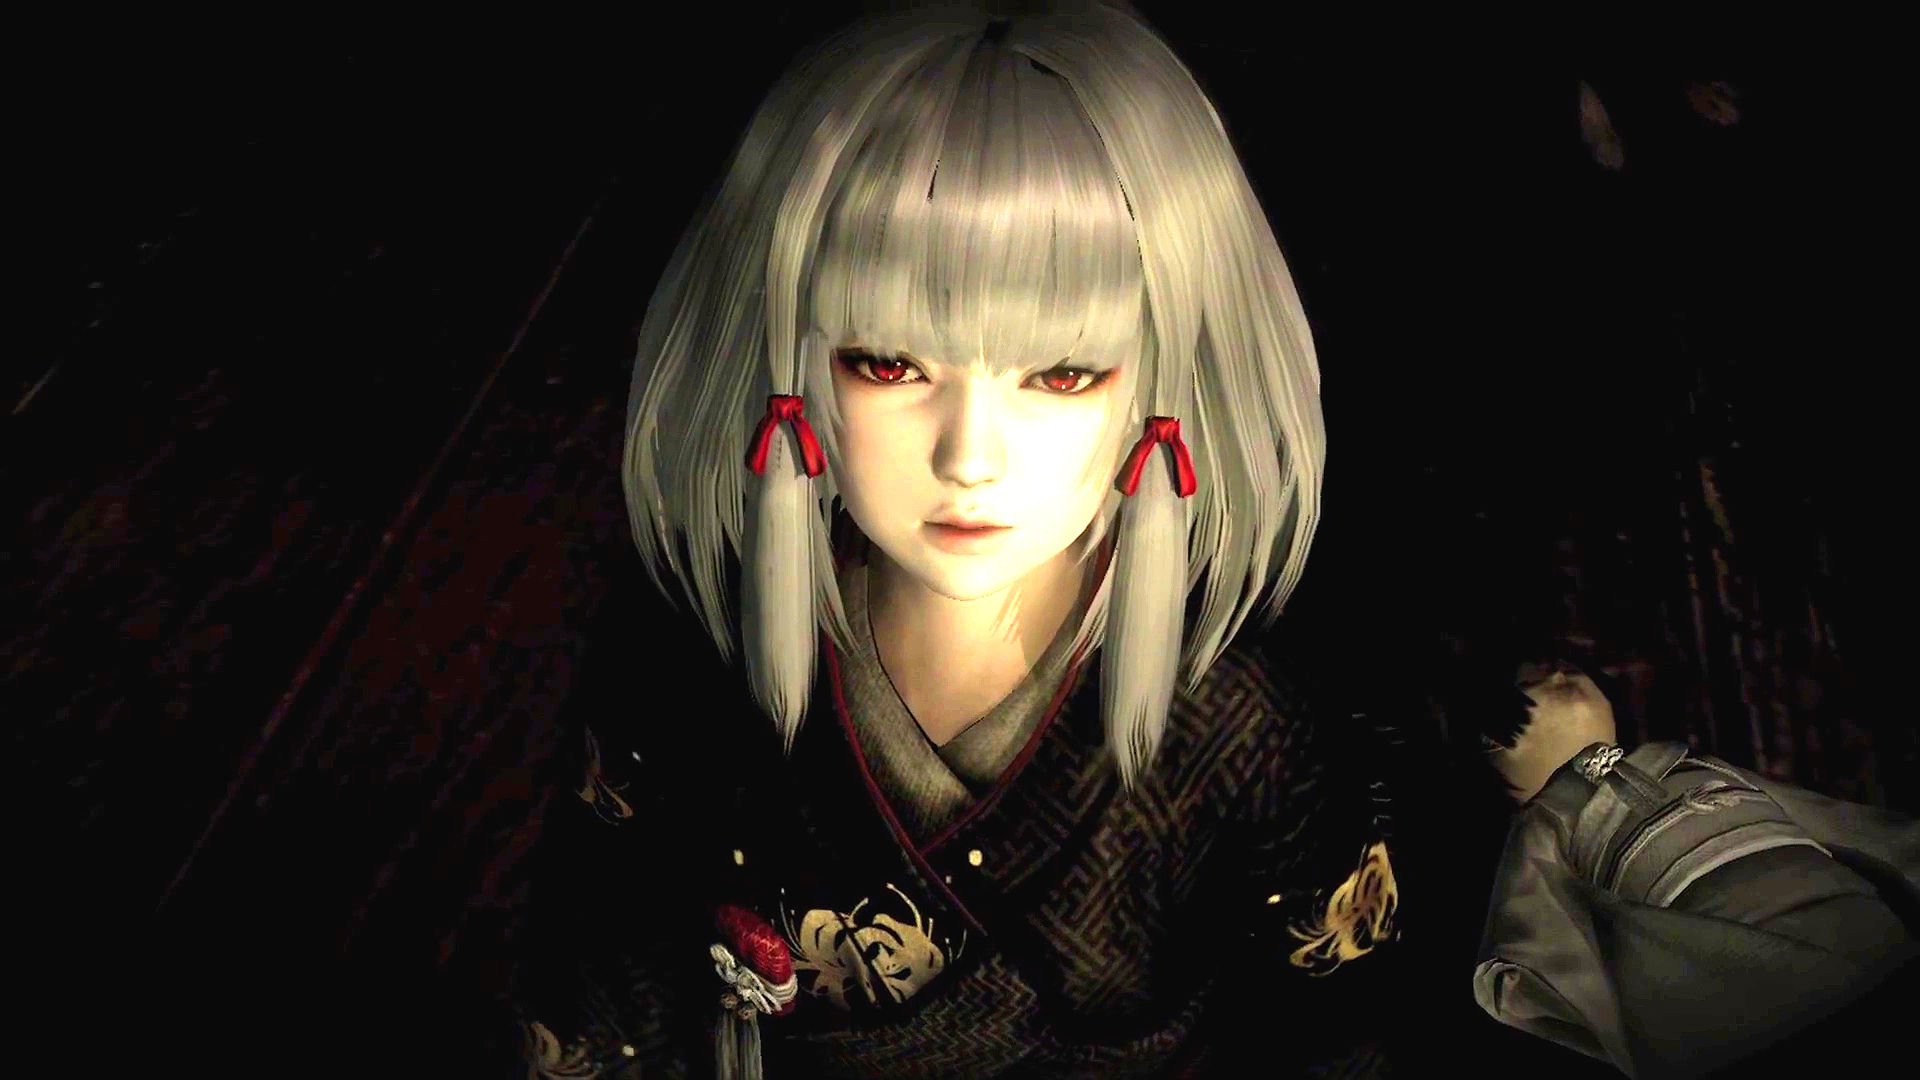 download fatal frame project zero maiden of black